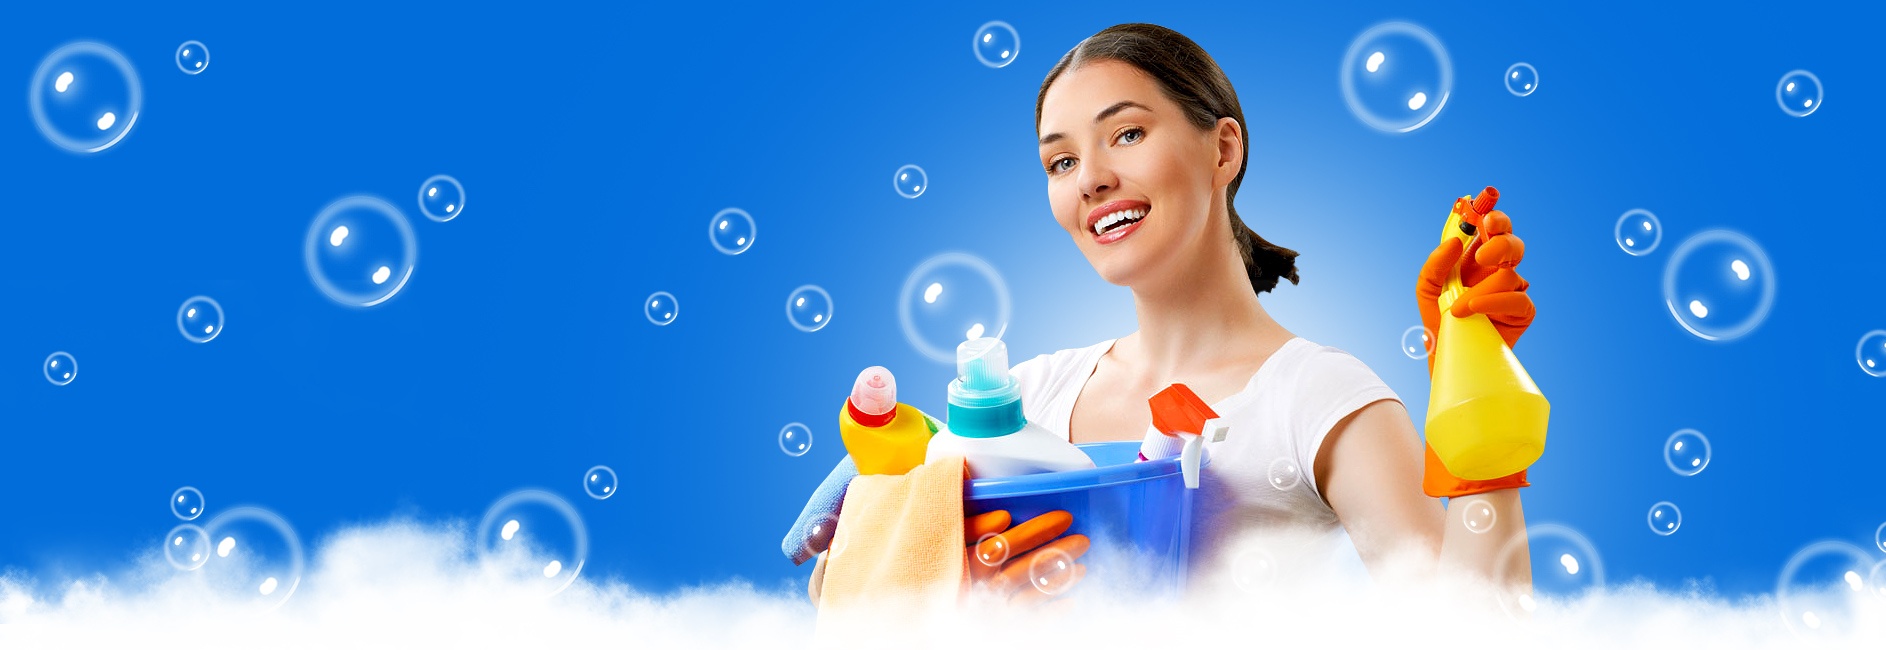 RELIABLE AND AFFORDABLE CLEANING SERVICES! IN BUSINESS SINCE 2002